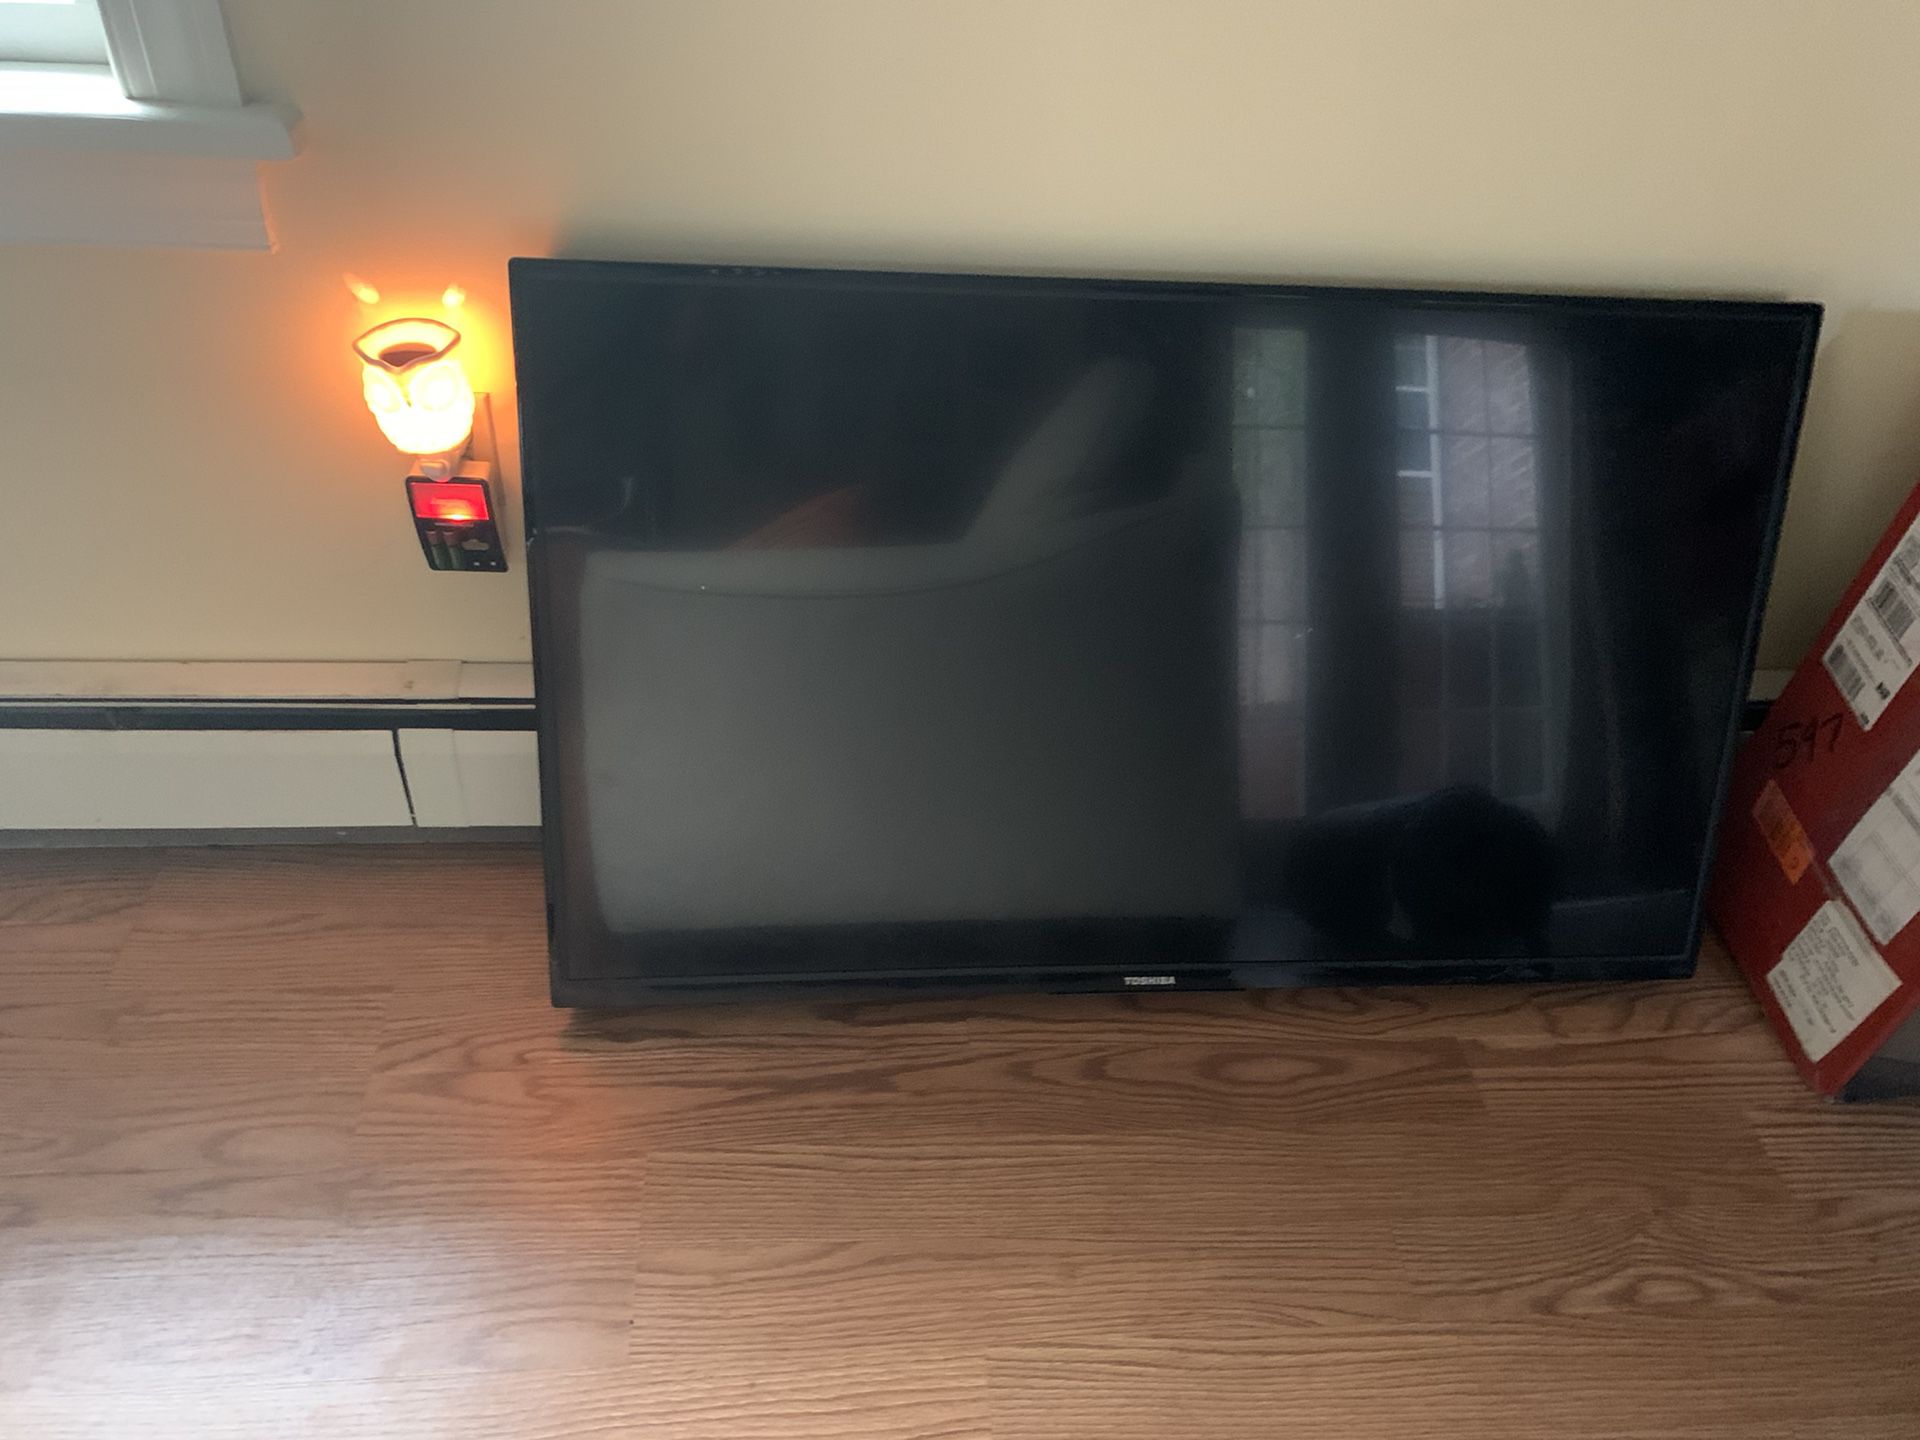 50in Toshiba smart tv with chromecast built in